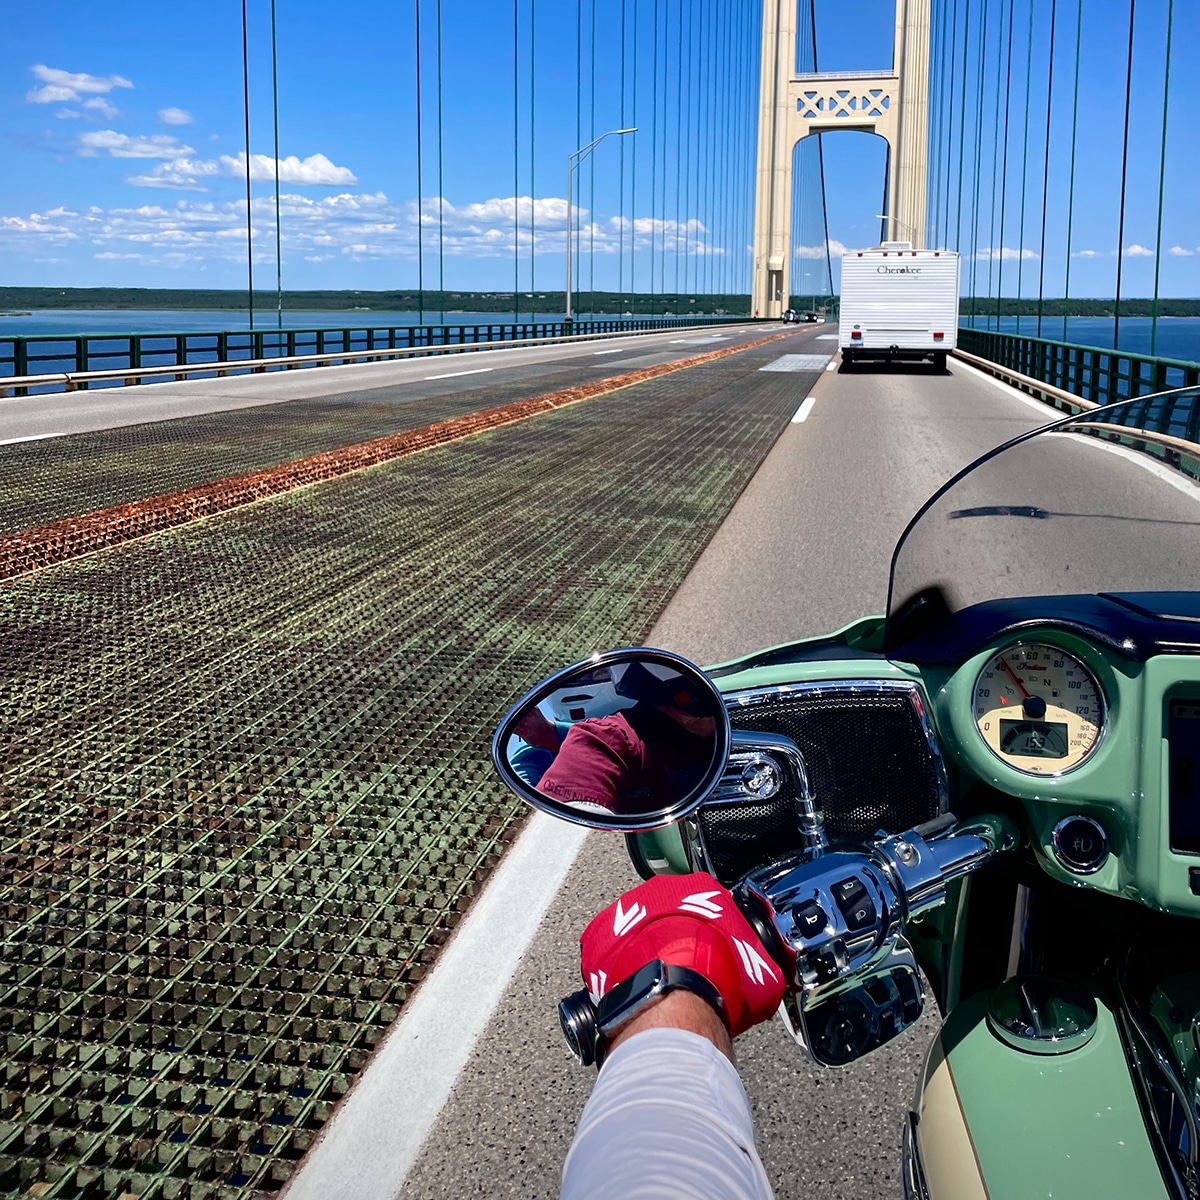 A photo taken from the back of our motorcycle while driving over the bridge that links Michigan's lower and upper peninsula.